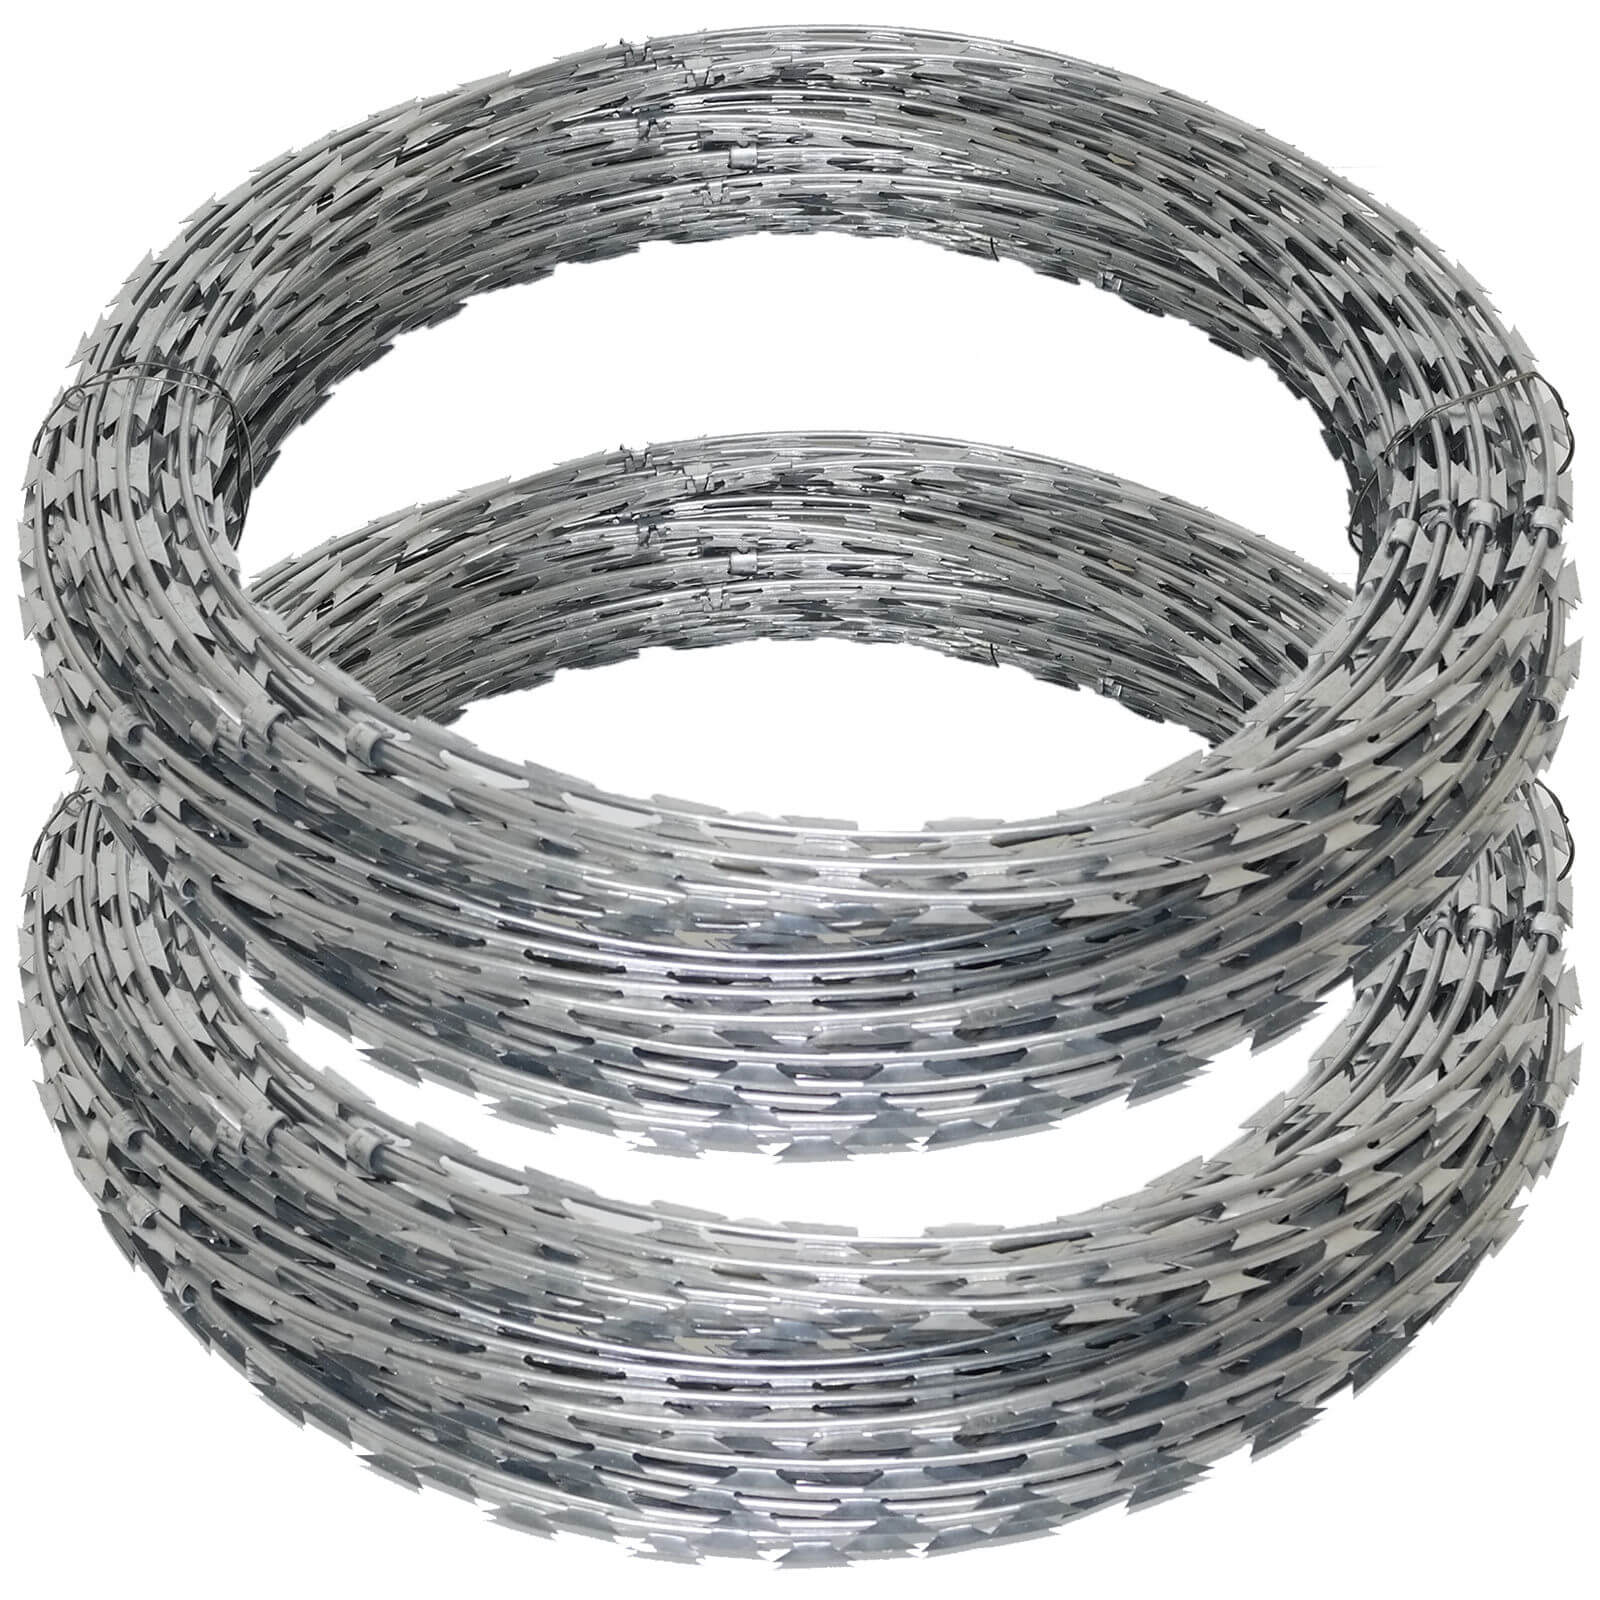 Razor wire installation - ensuring protection for your property